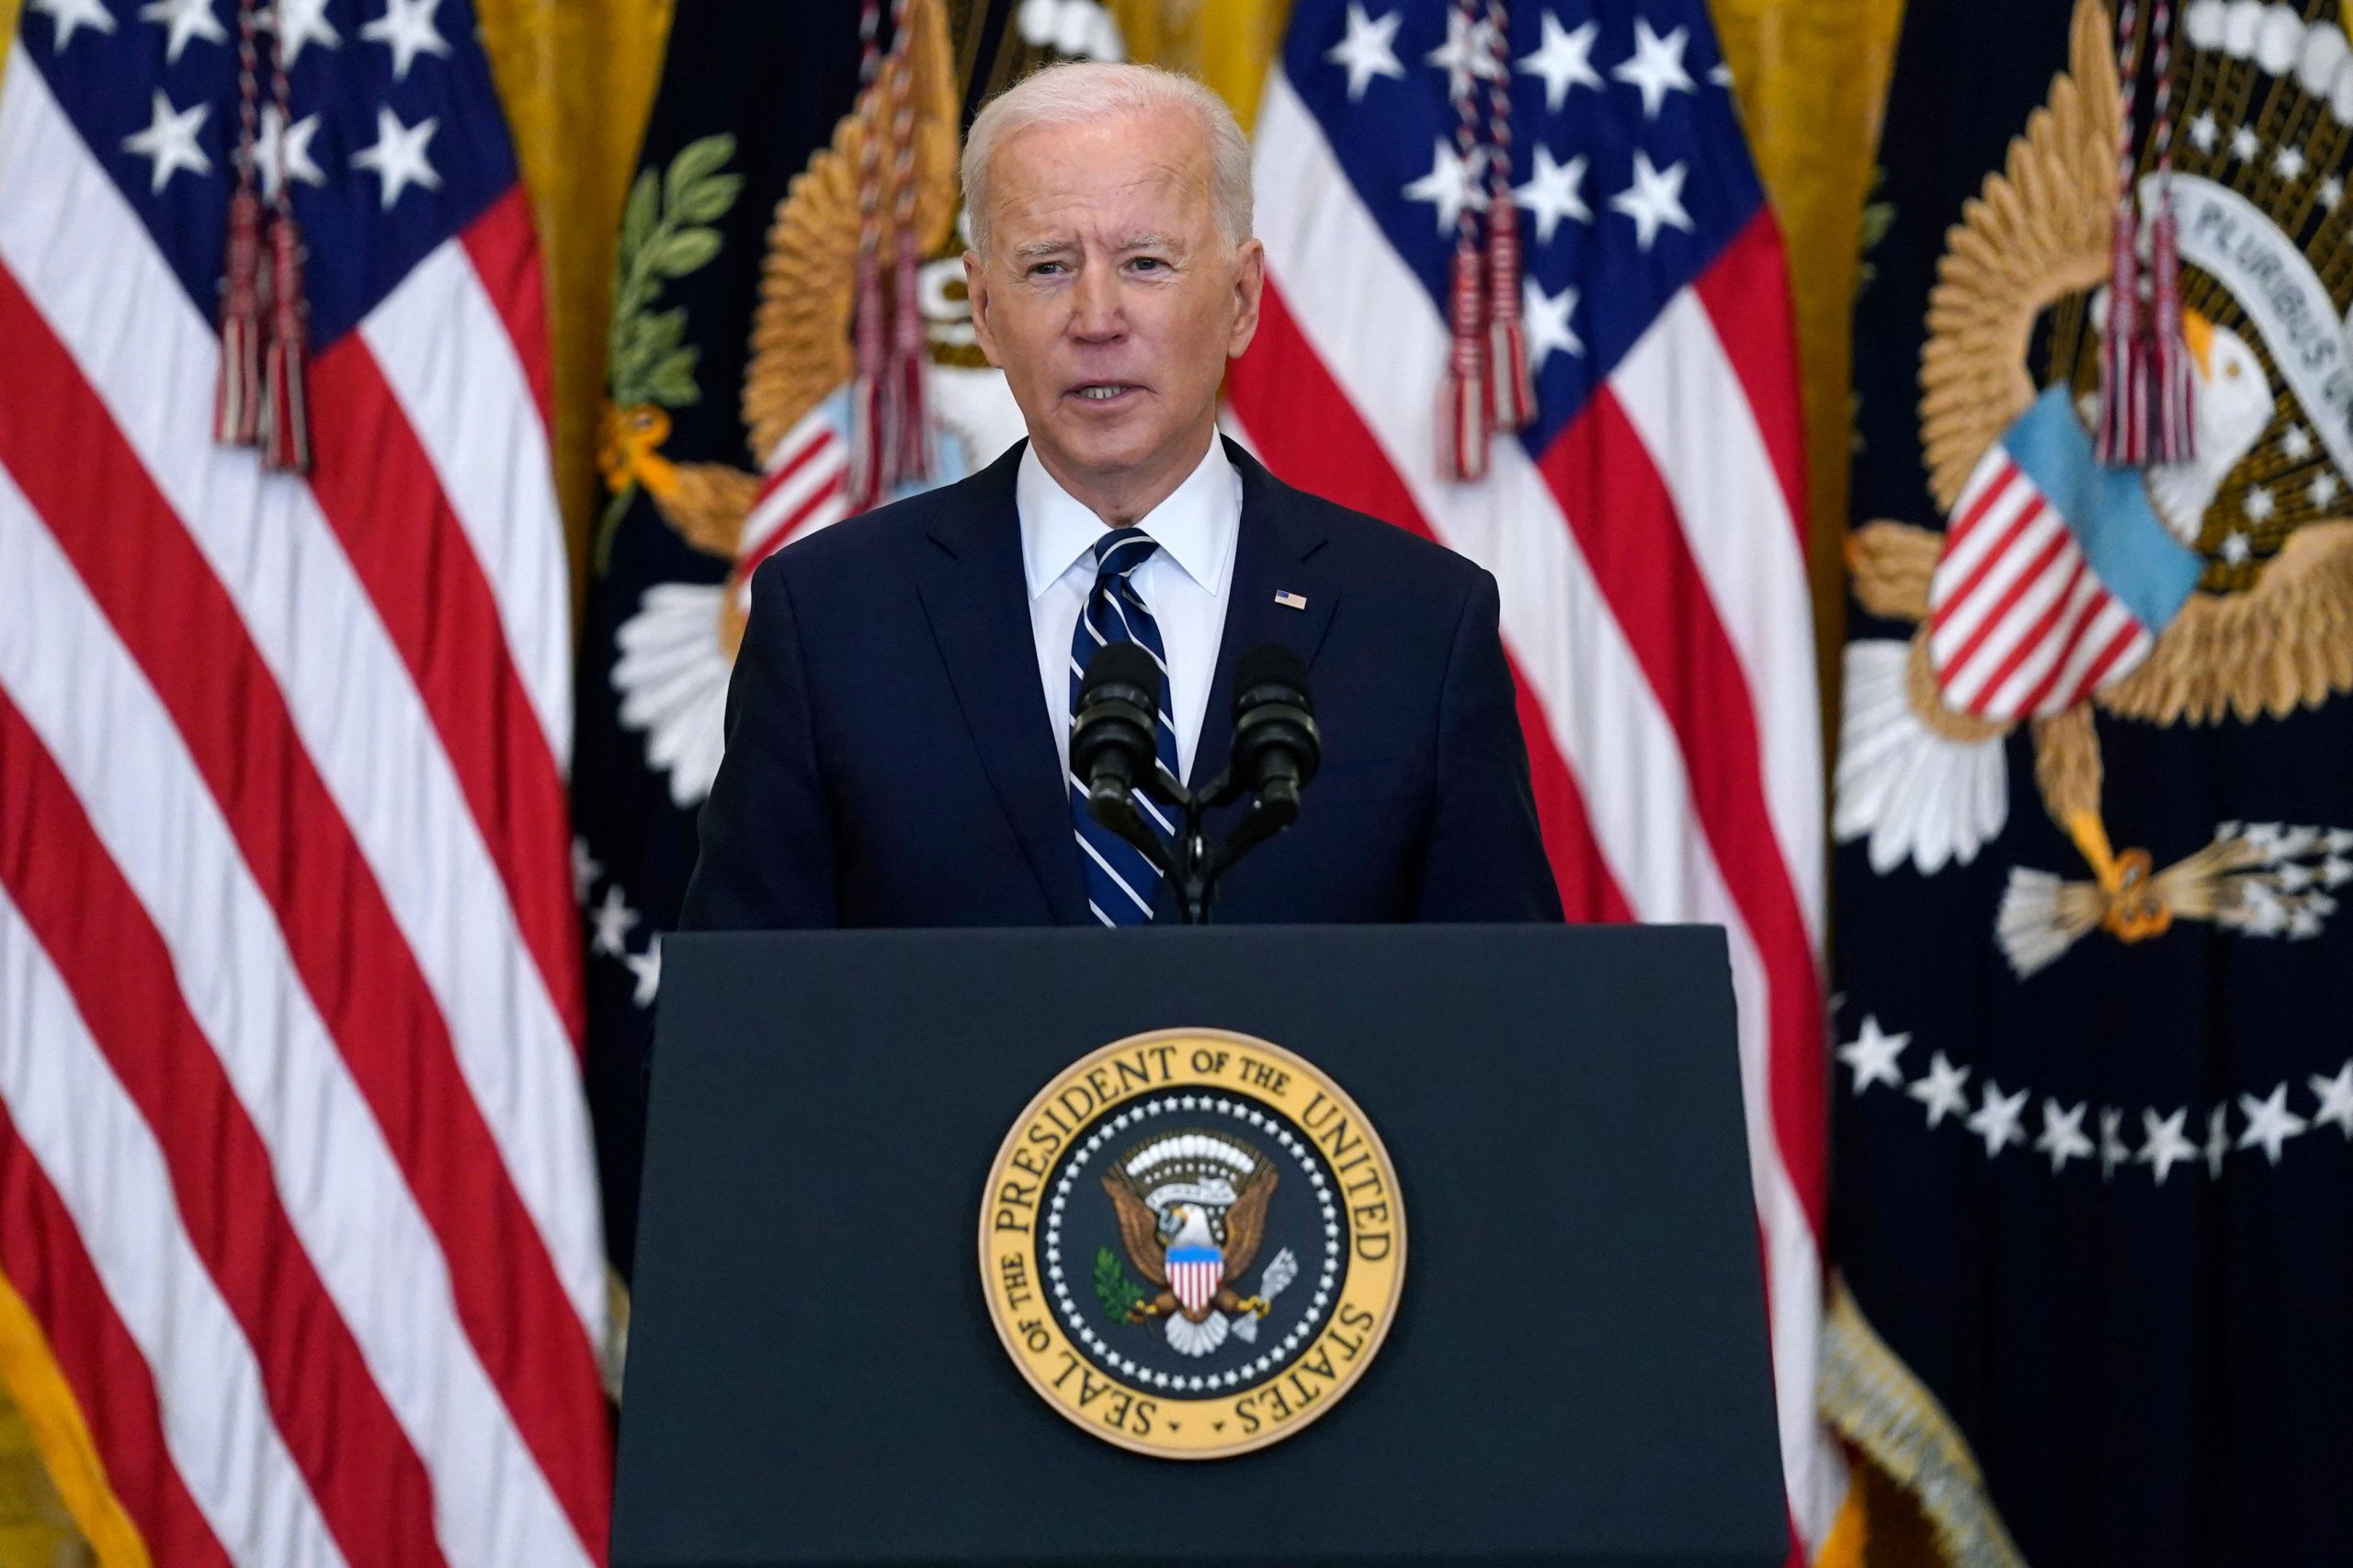 ‘Prepared to take further actions’: US President Joe Biden warns Moscow